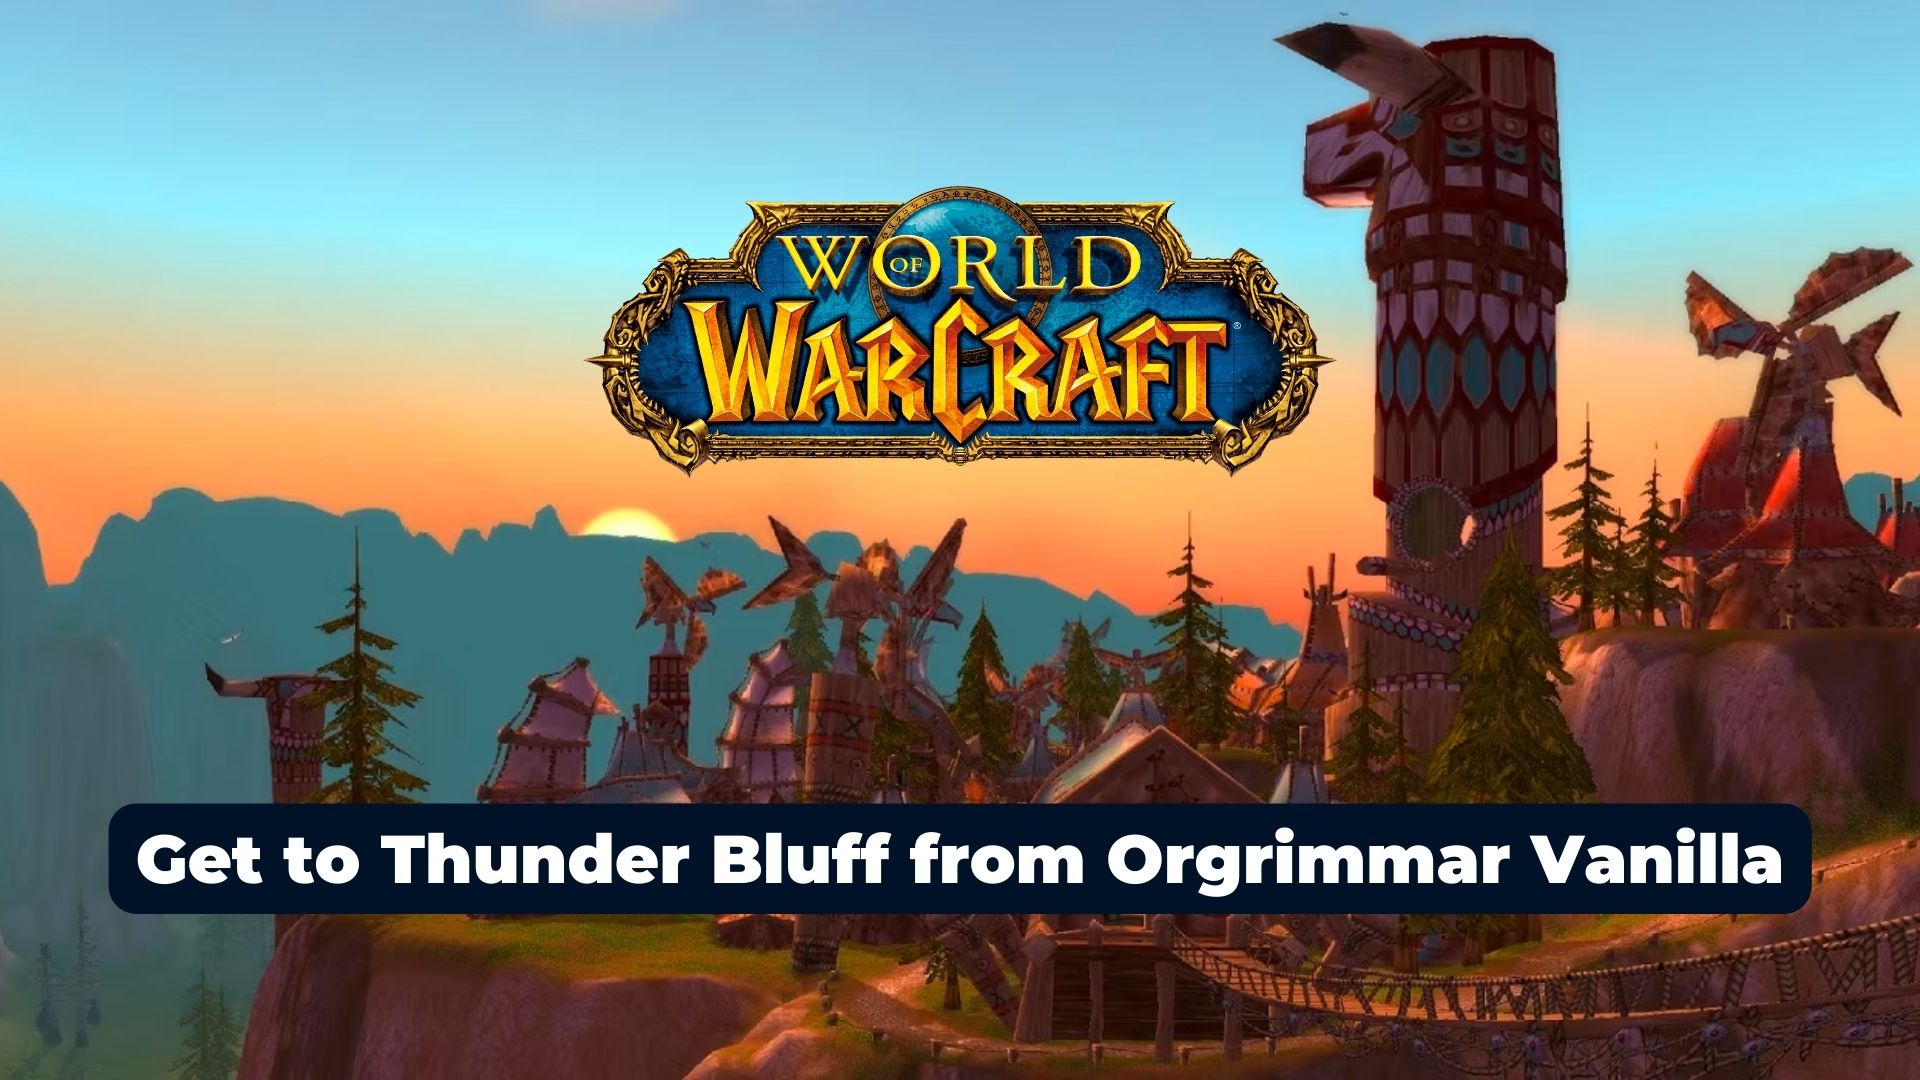 How to Get to Thunder Bluff from Orgrimmar Vanilla